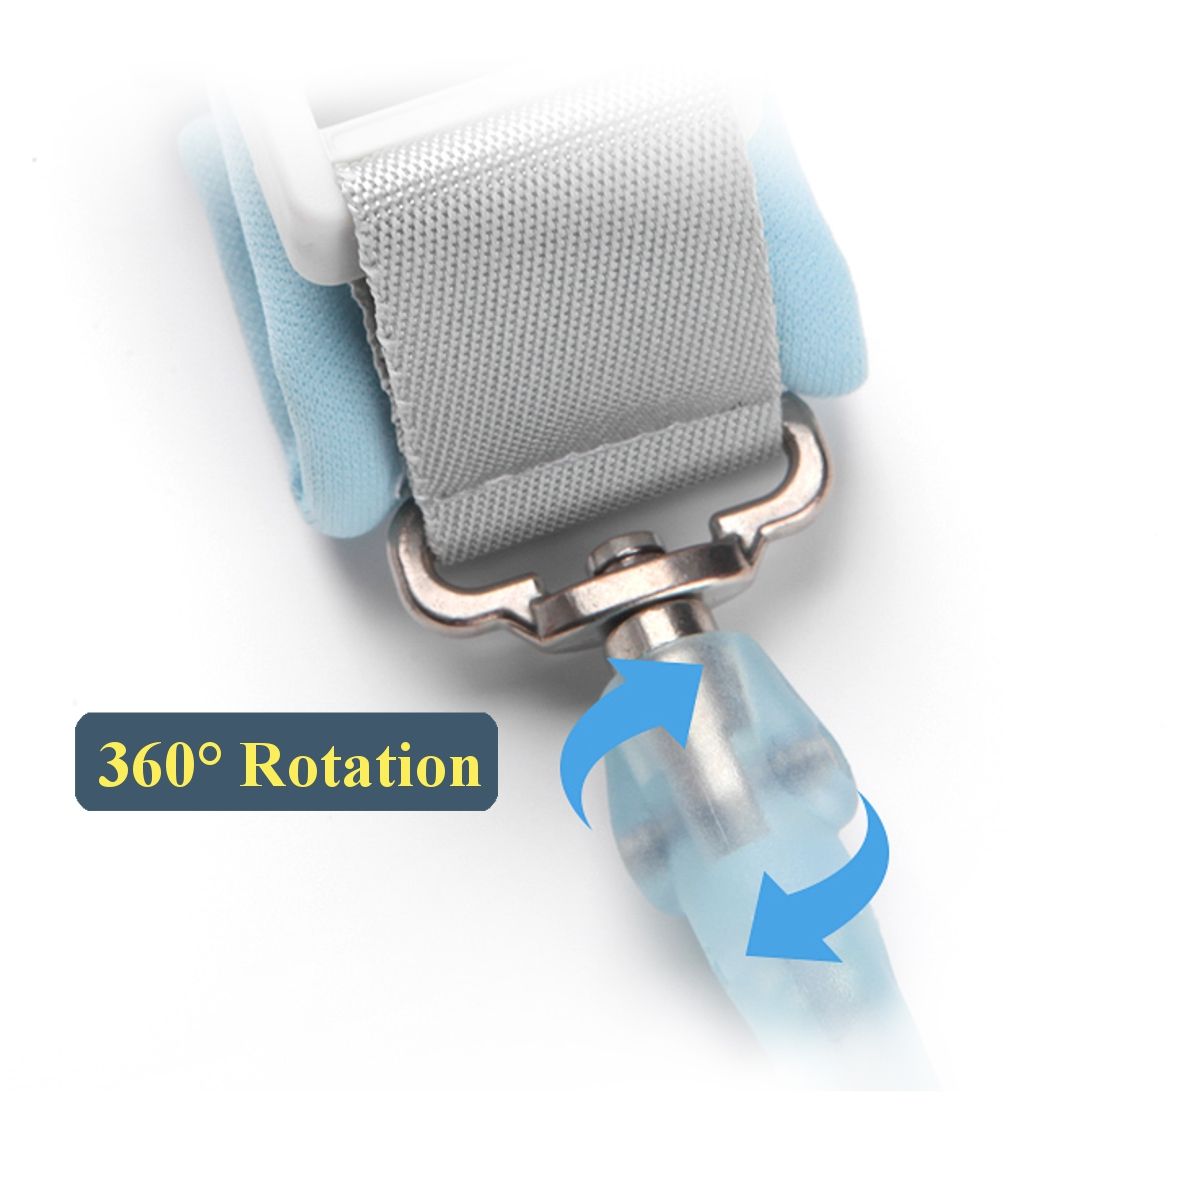 Reflective-Rope--Rotating-Head--Induction-Lock-15m2m25m-Anti-Lost-Belt-Anti-Lost-Device-Traction-Rop-1589625